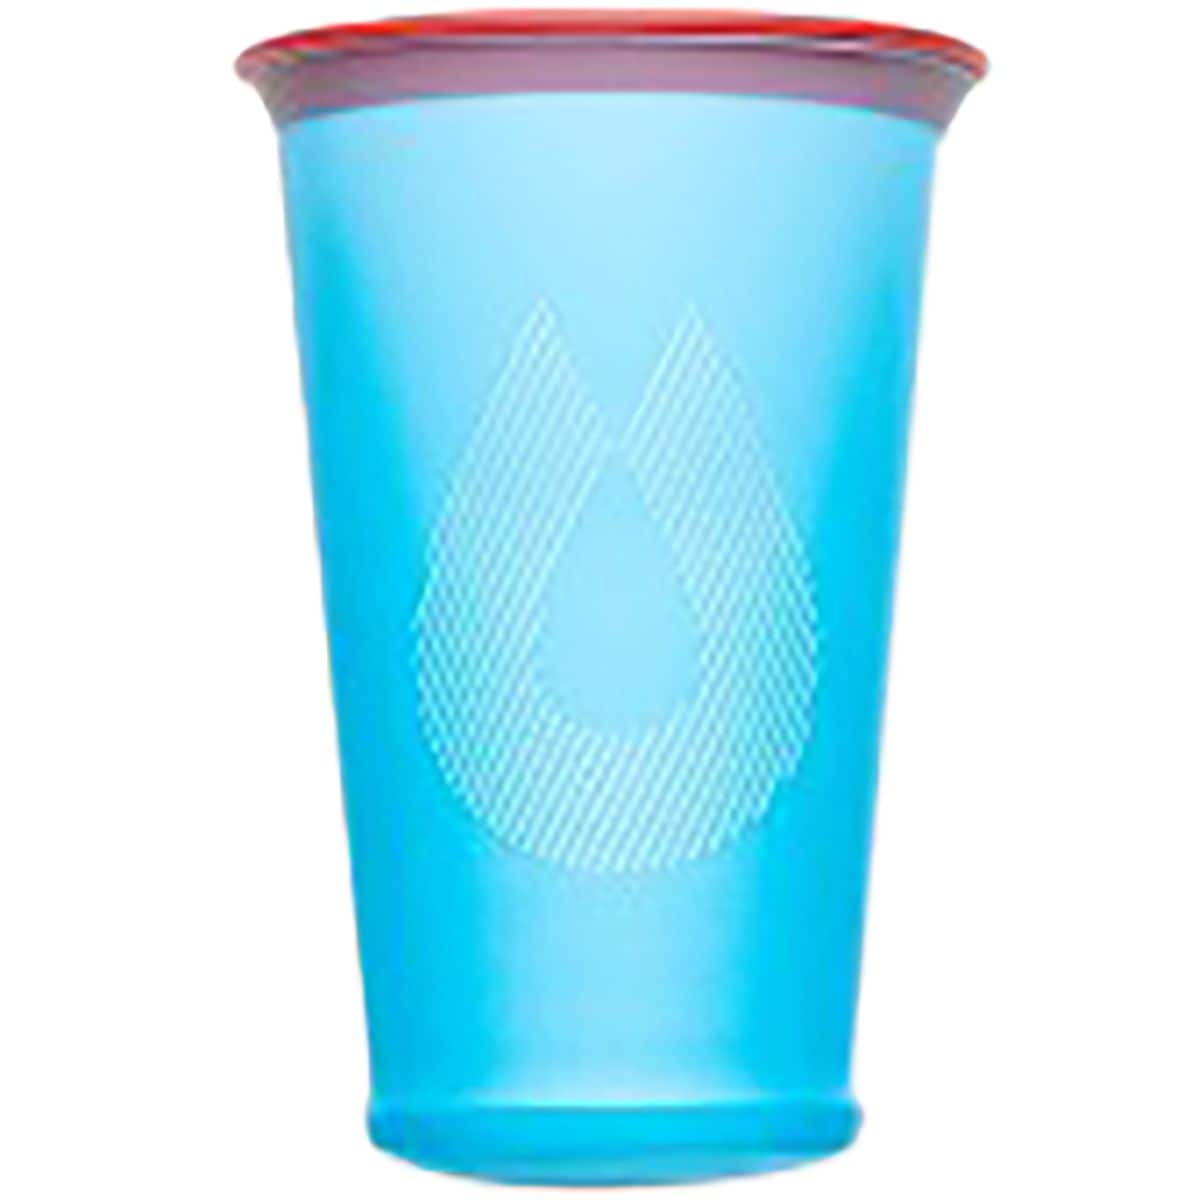 Hydrapak Speed Cup - 2 Pack